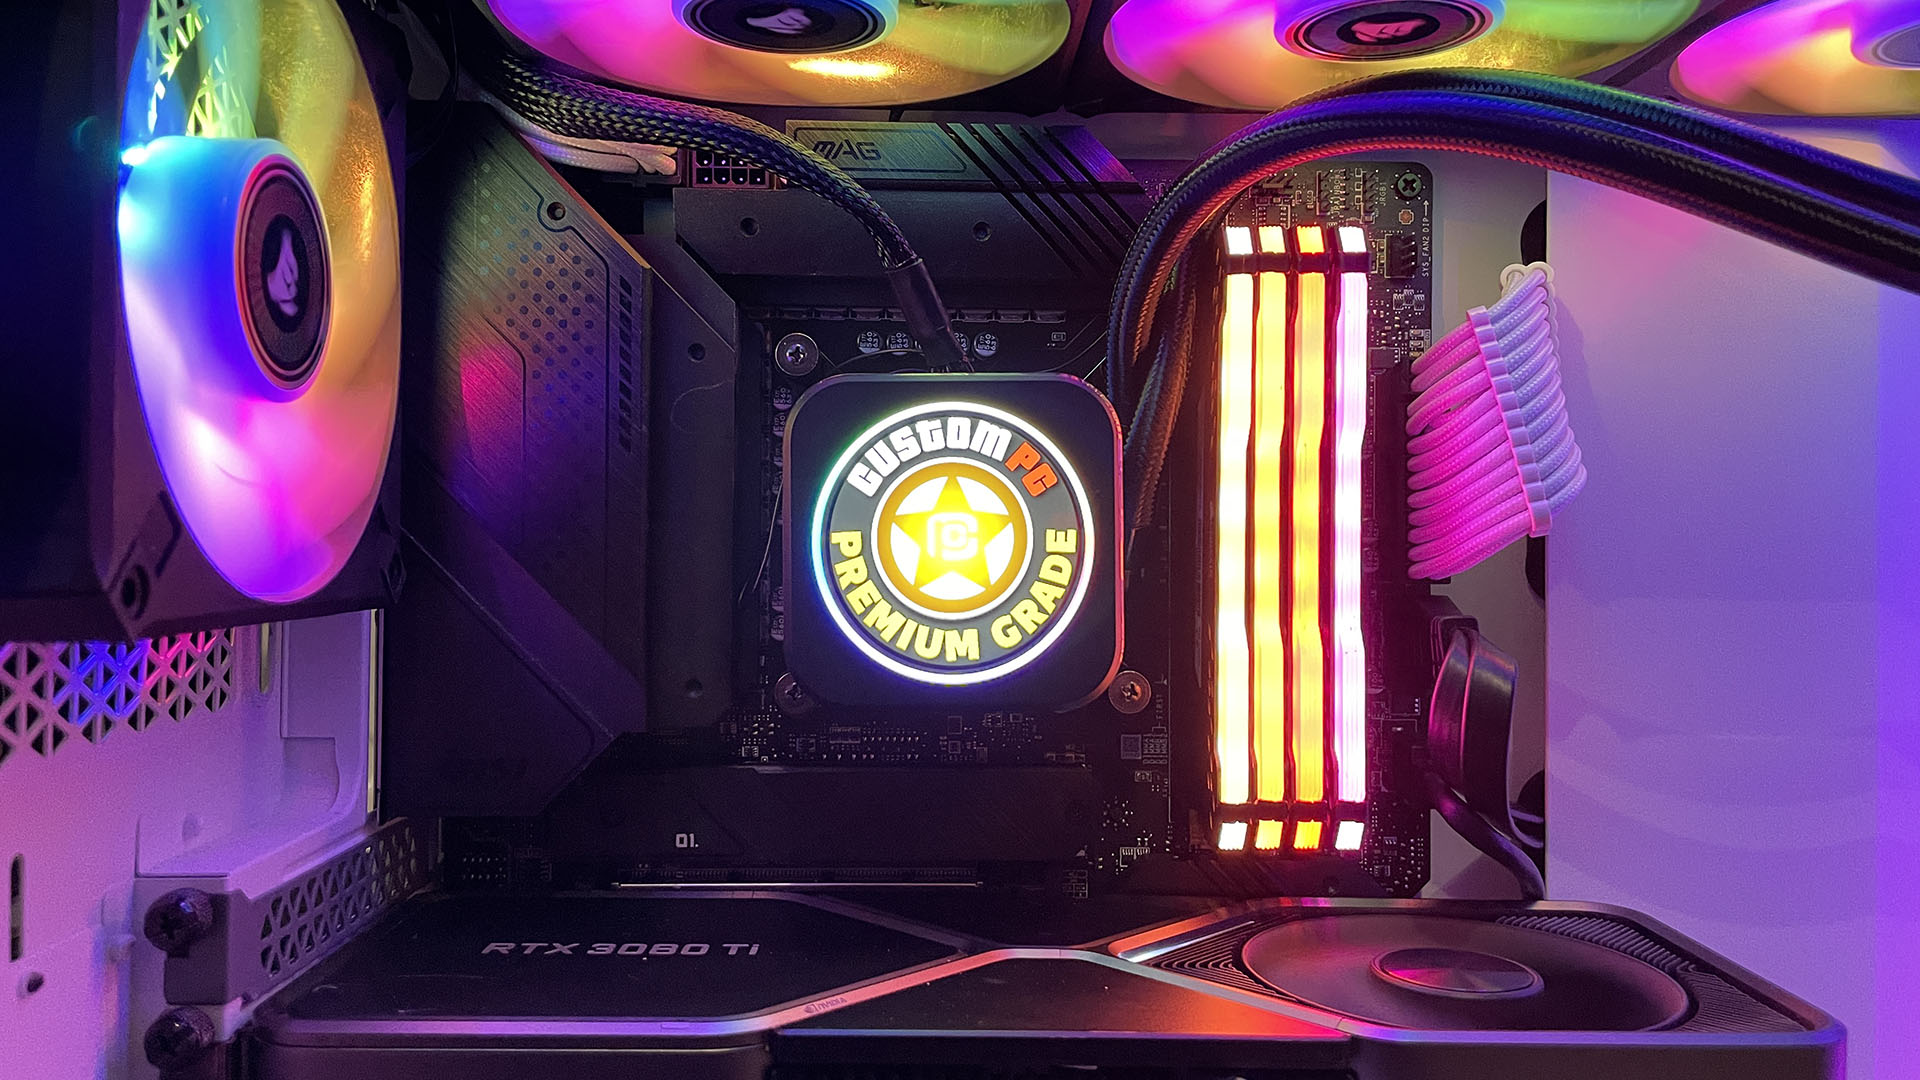 PC airflow 101 – how to set up your case fans